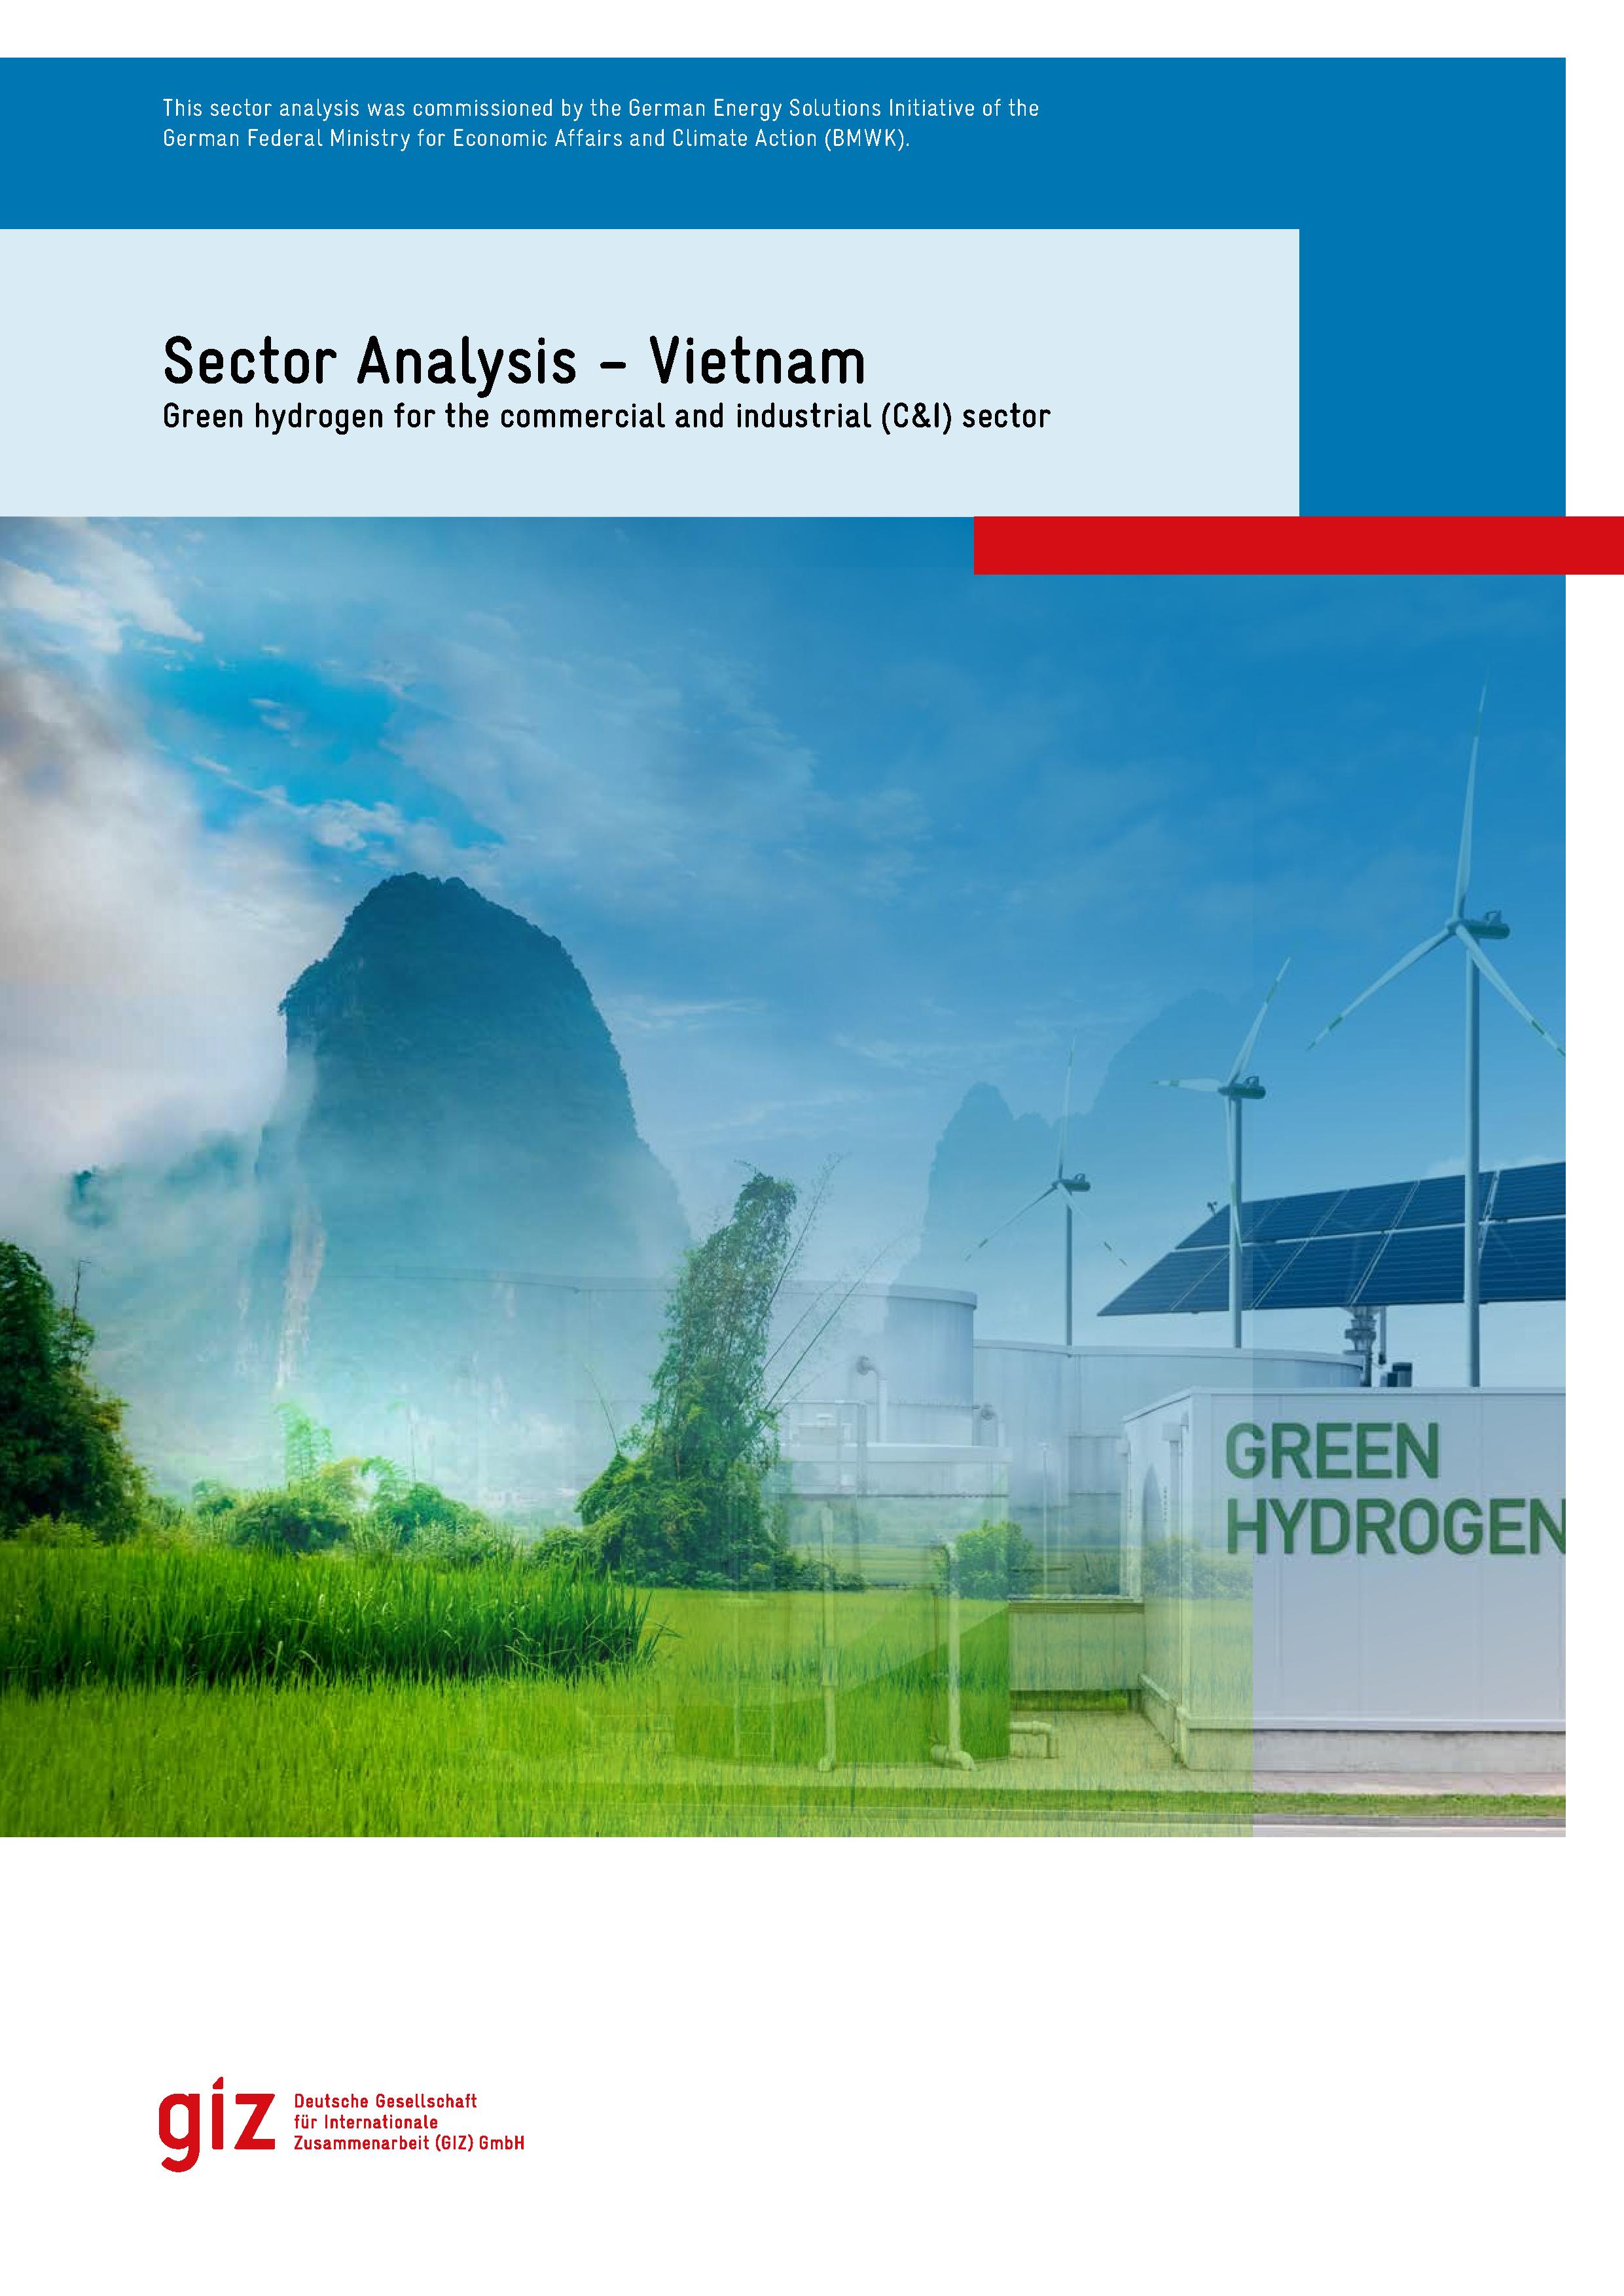 Green hydrogen for the commercial and industrial (C&I) sector in Vietnam